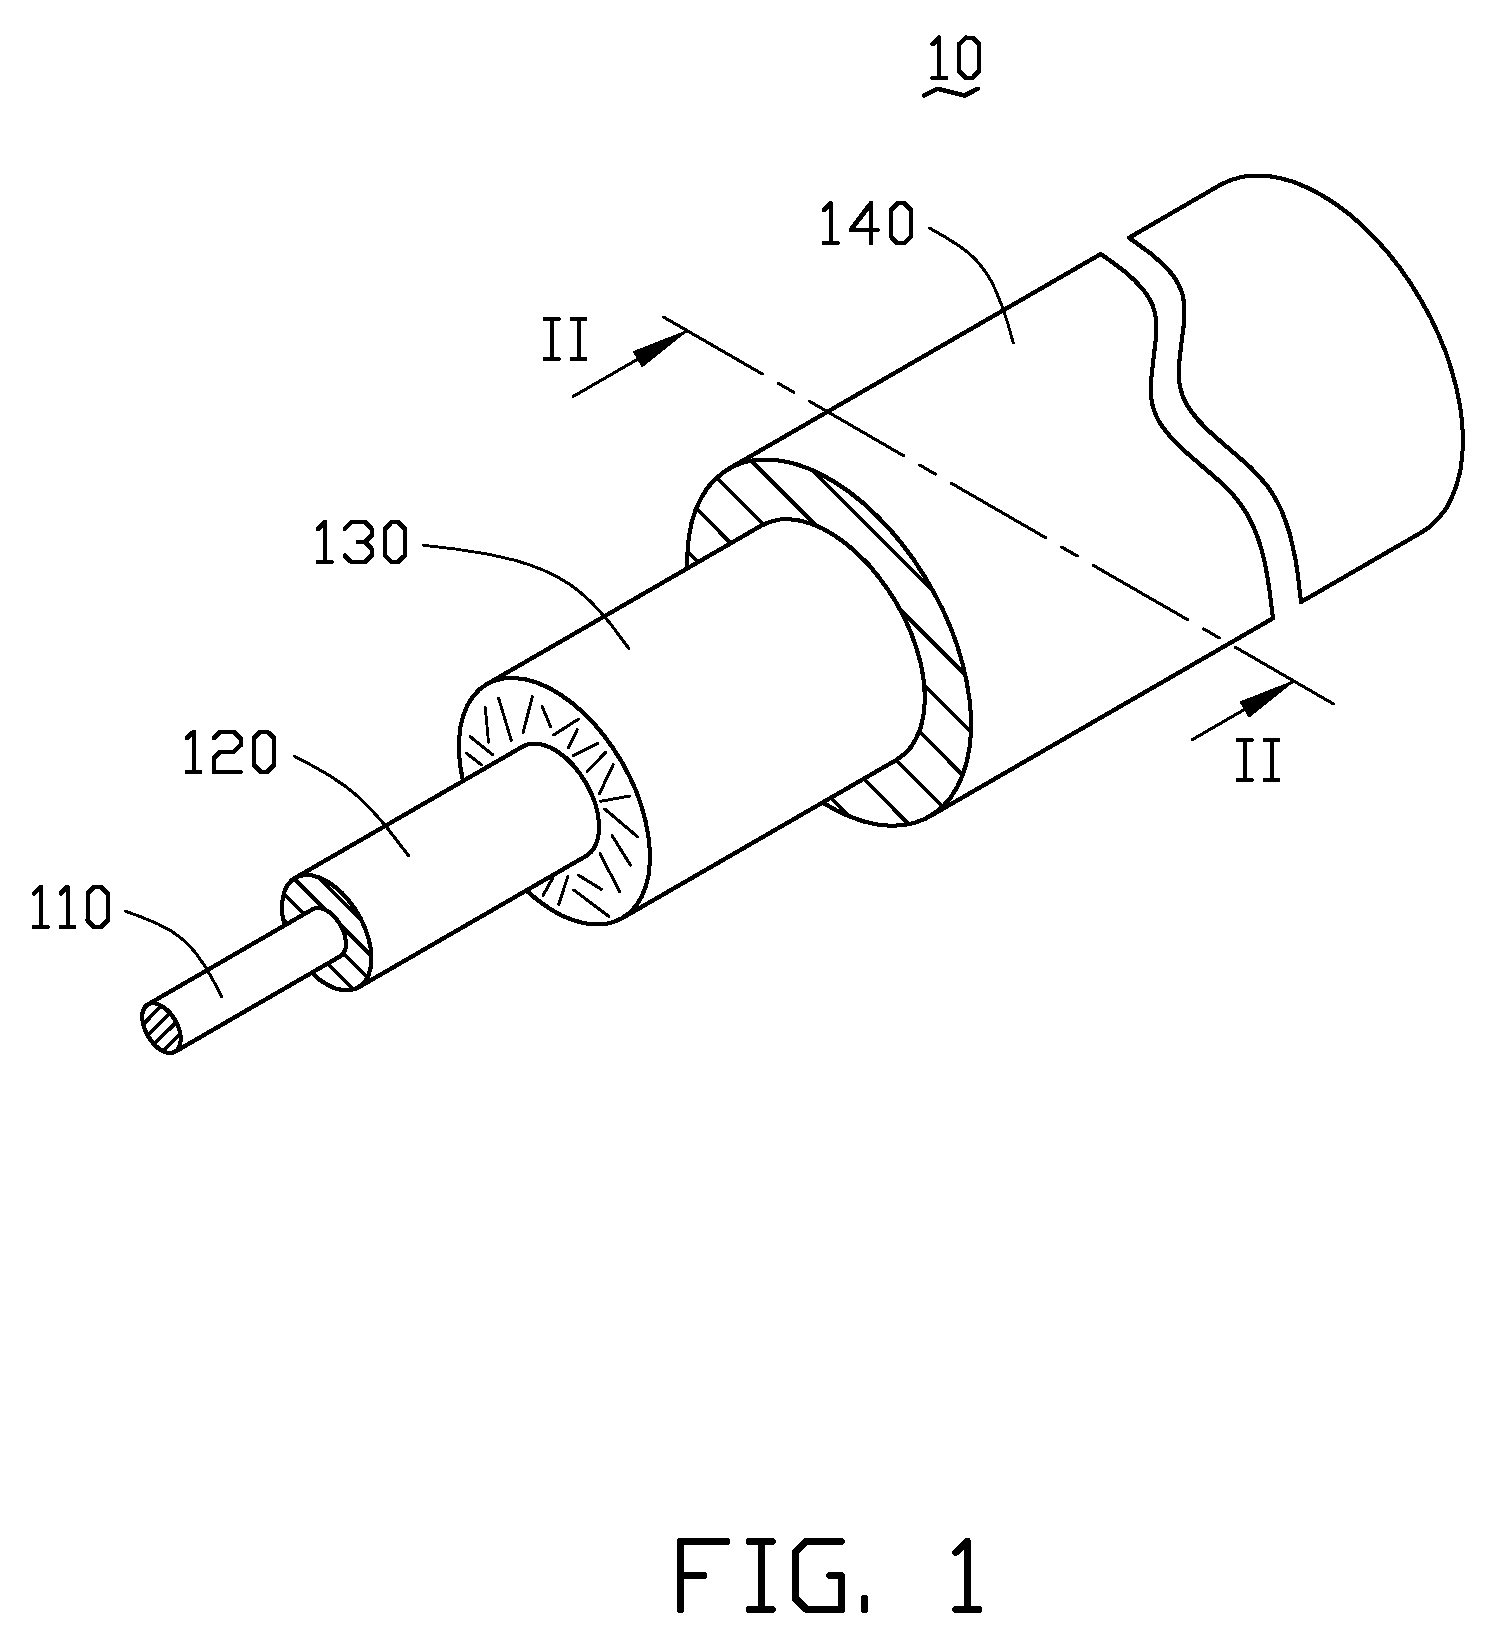 Composite coaxial cable employing carbon nanotubes therein